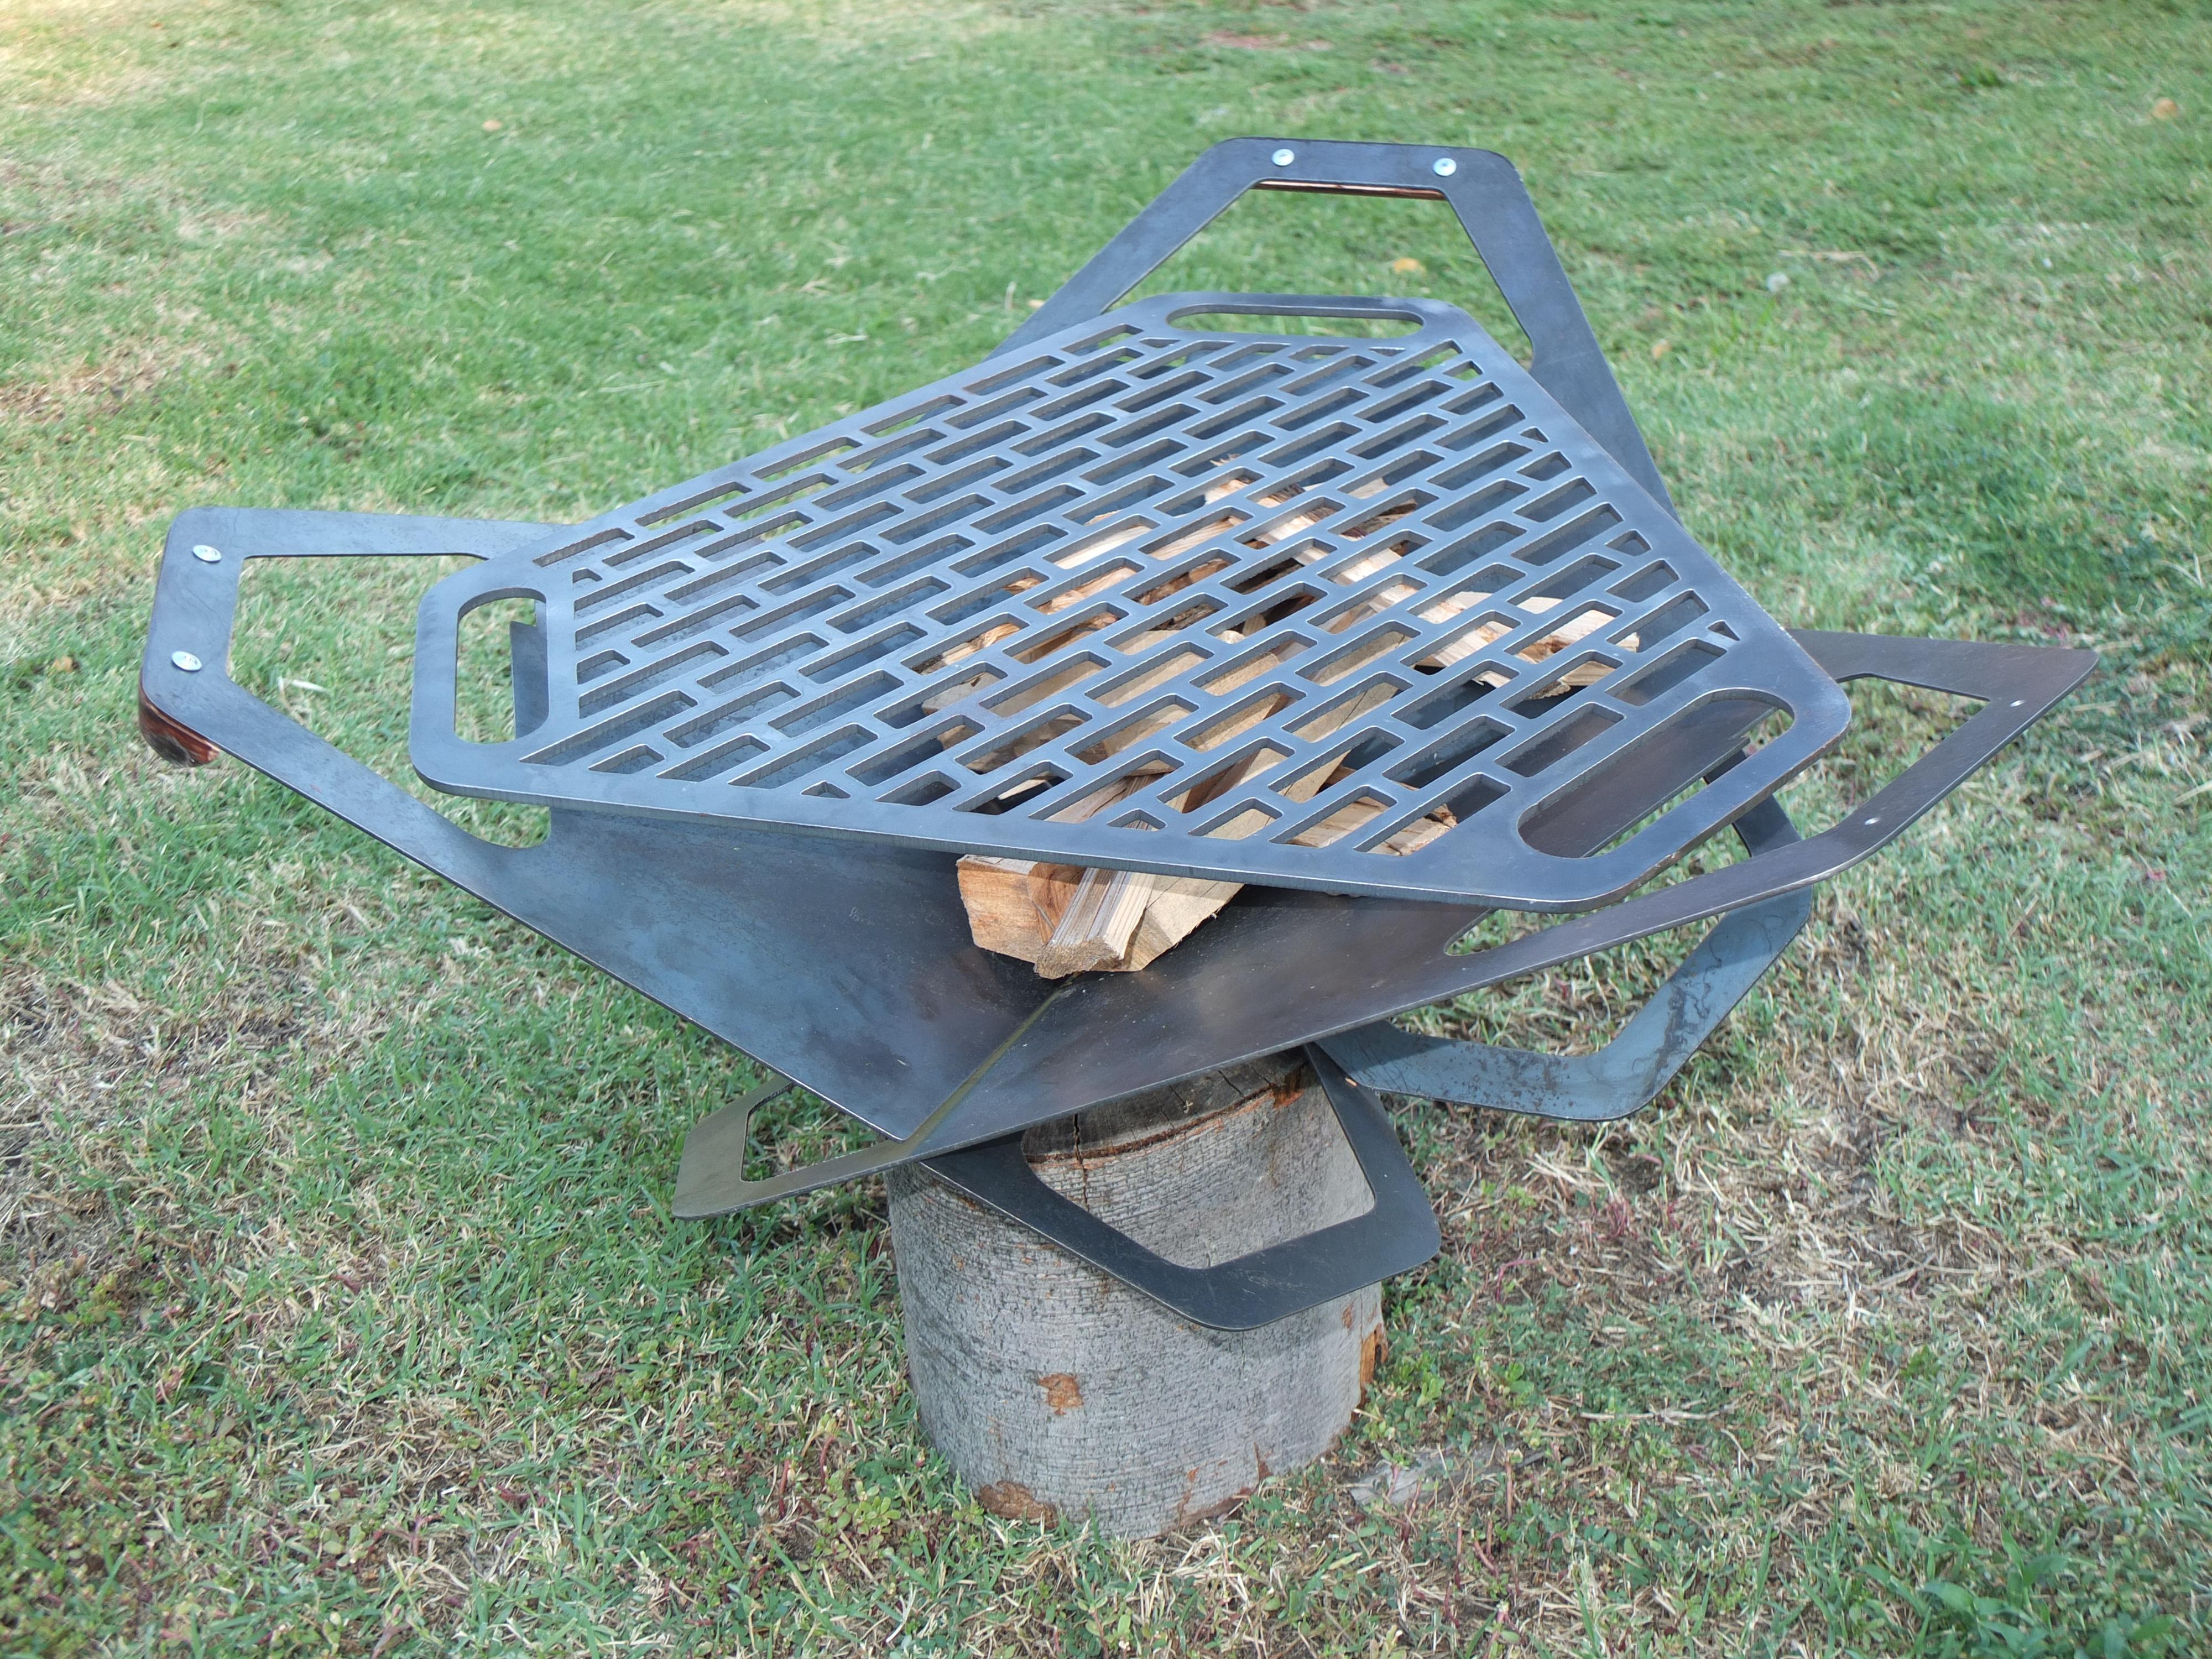 Bulgarian Unique Design of Demountable Fire Pit or BBQ Made of Plasma Cut Steel For Sale